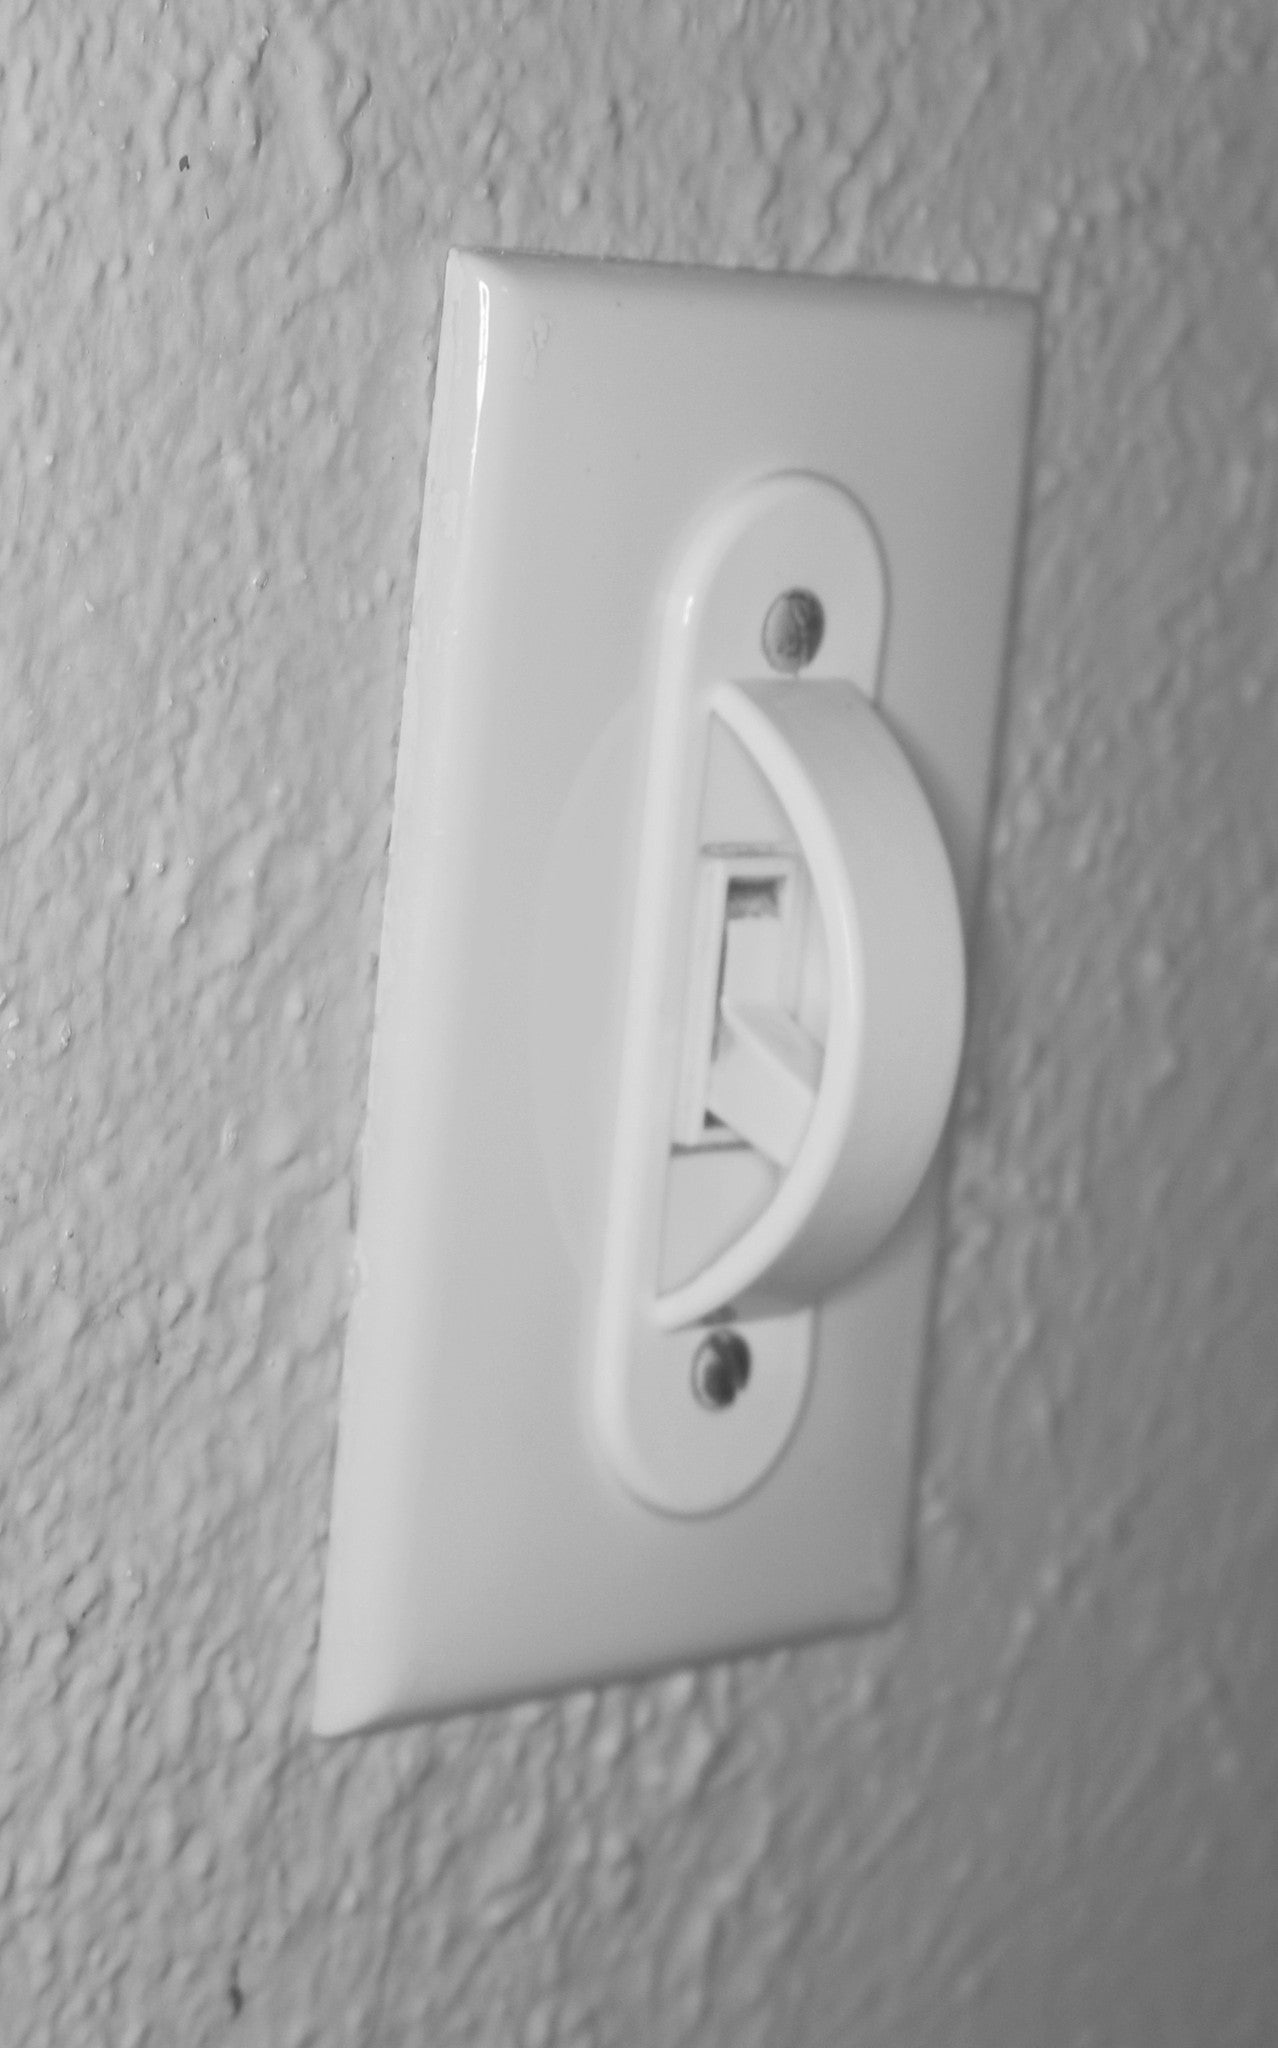 White Switch Plate Cover Guard Keeps Light Switch ON or Off- Multi pack